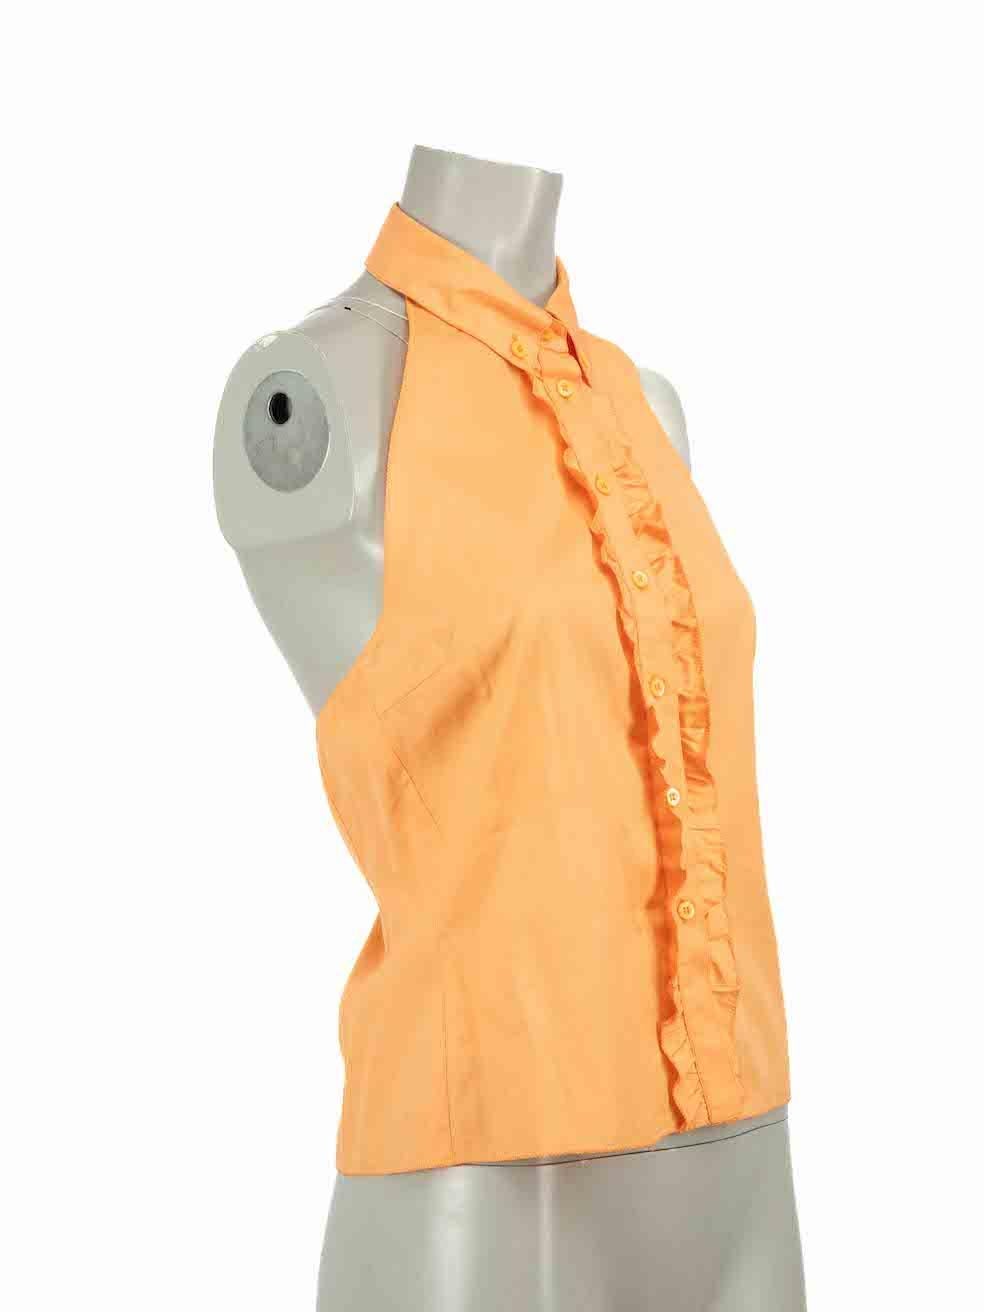 CONDITION is Very good. Hardly any visible wear to top is evident on this used Miu Miu designer resale item.
 
Details
Orange
Cotton
Top
Halterneck
Cropped
Open back
Sleeveless
Button fastening
Ruffle detail

Made in Italy
 
Composition
100% Cotton
